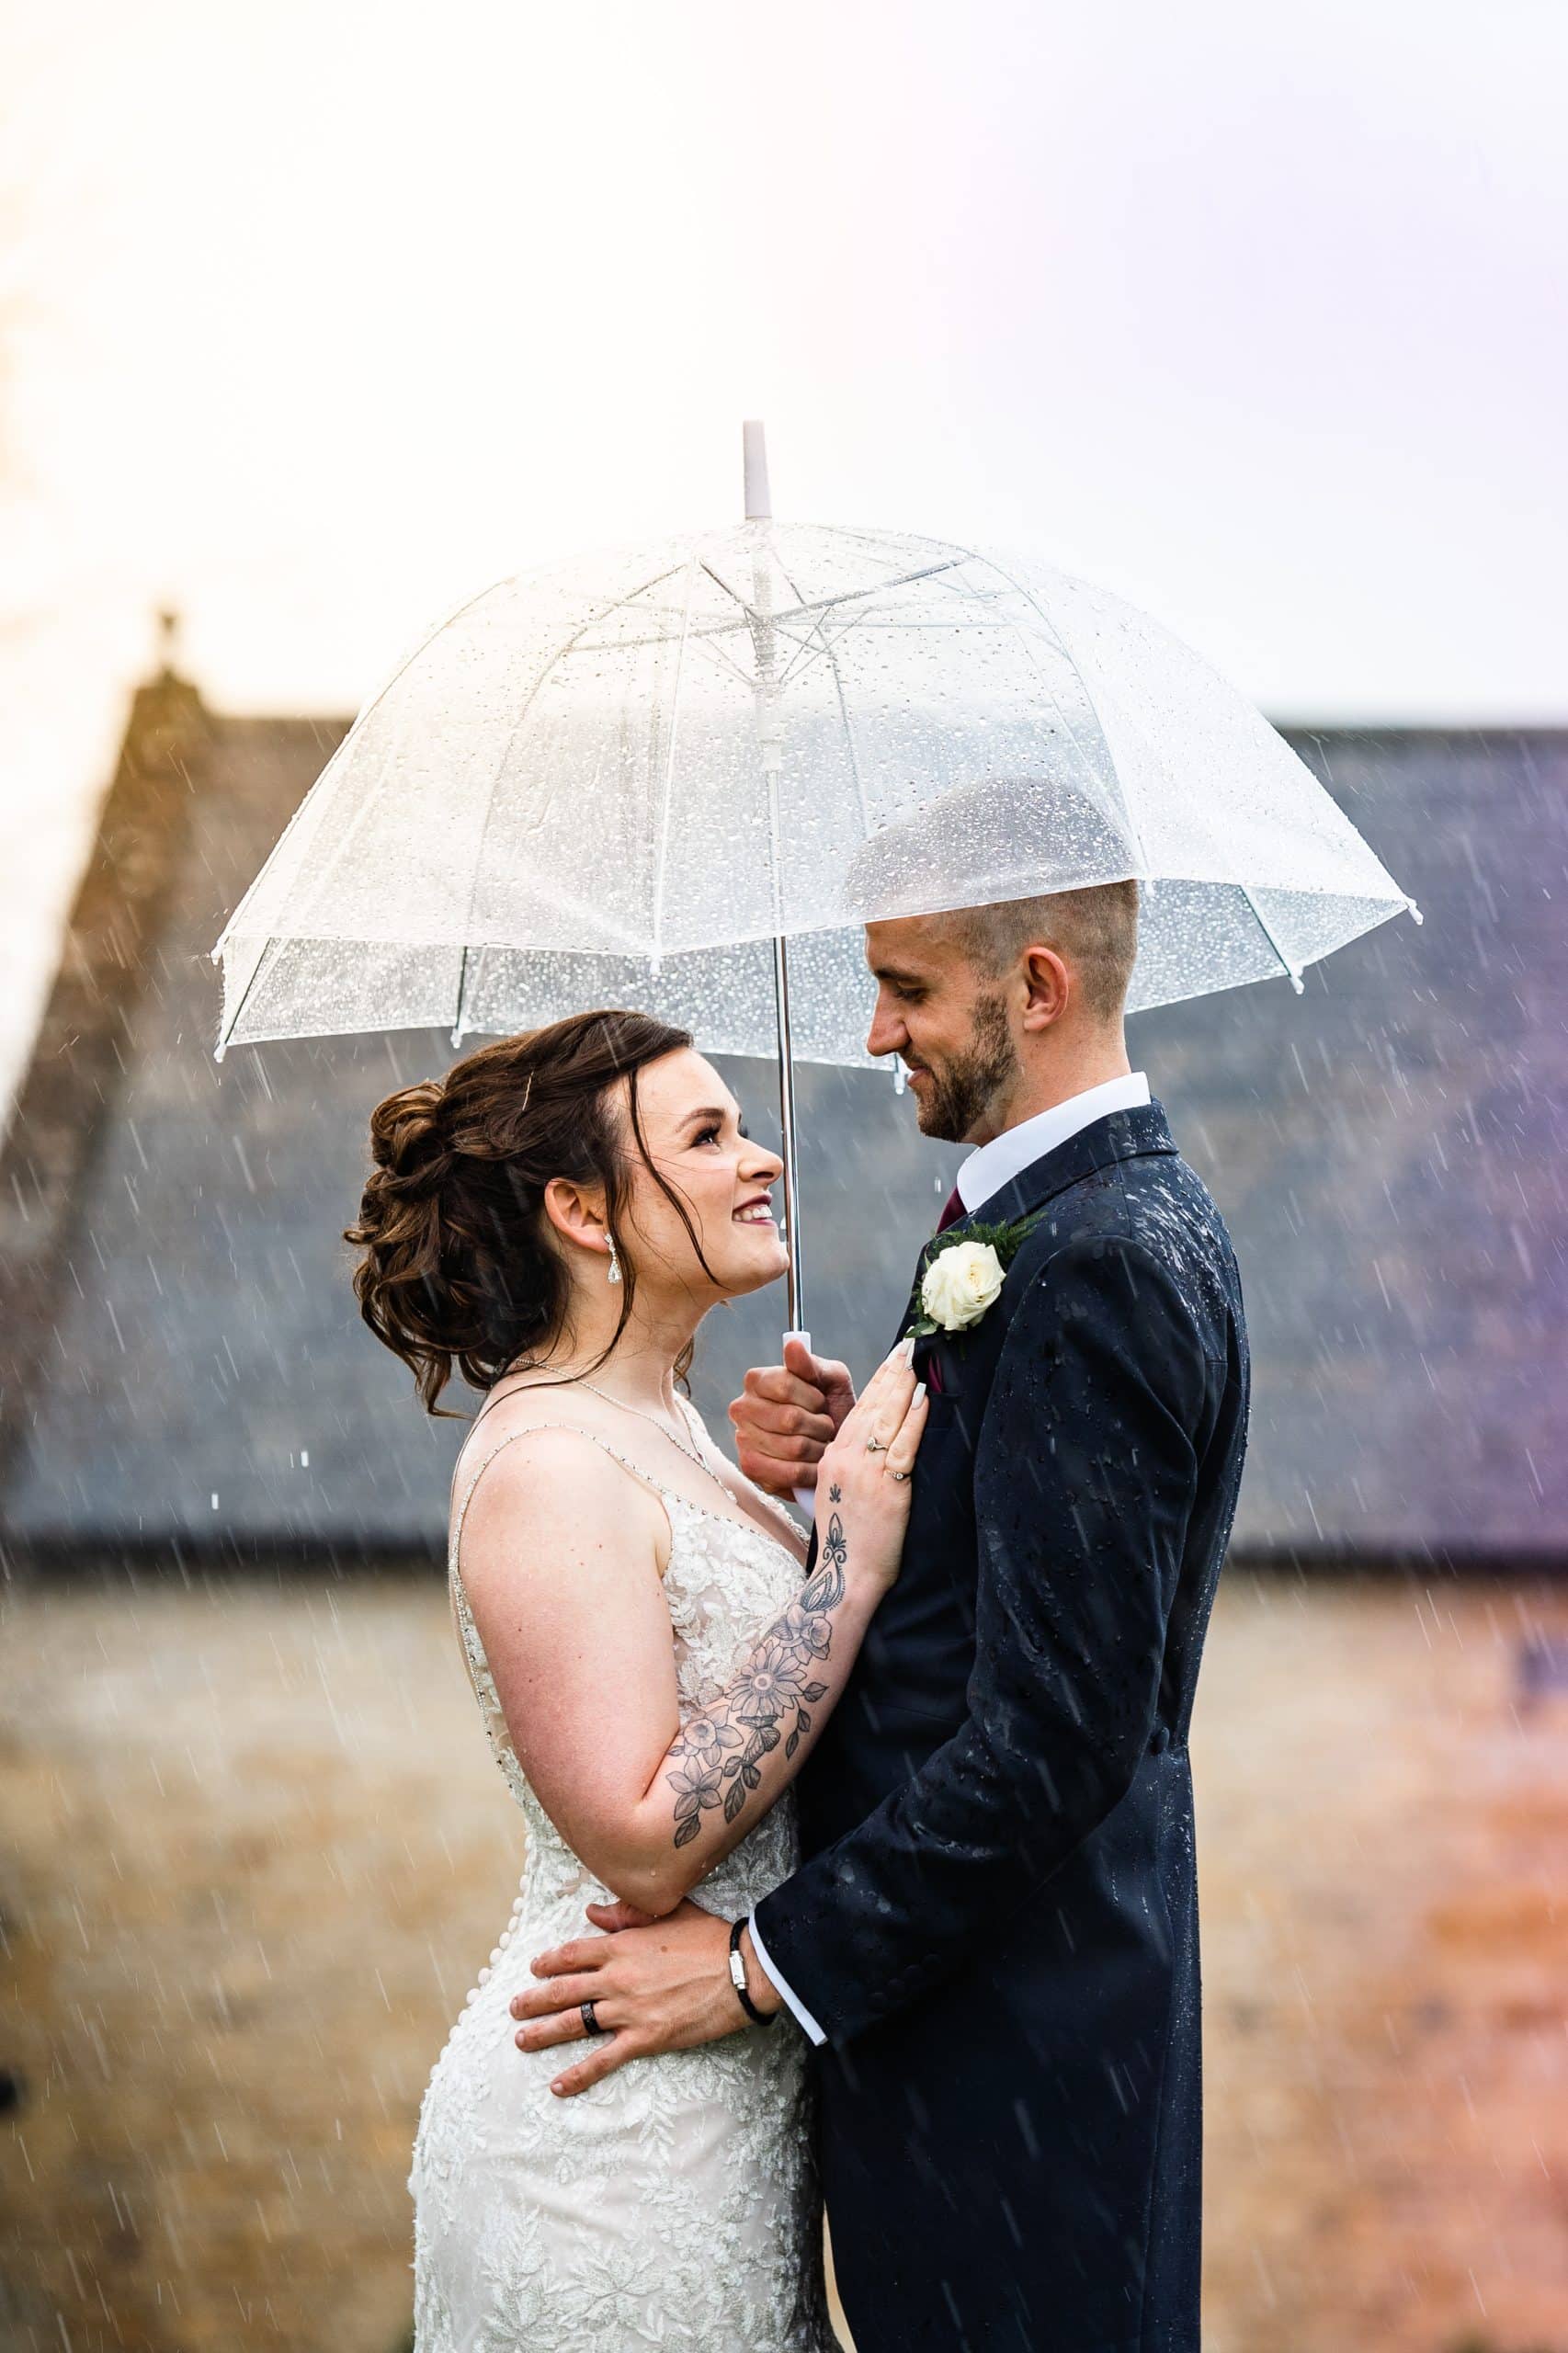 The Barn at Upcote recommended photographer Pedge Photography captures this stunning shot that creatively utilises the downpour of rain that hits Mollie & Matt.